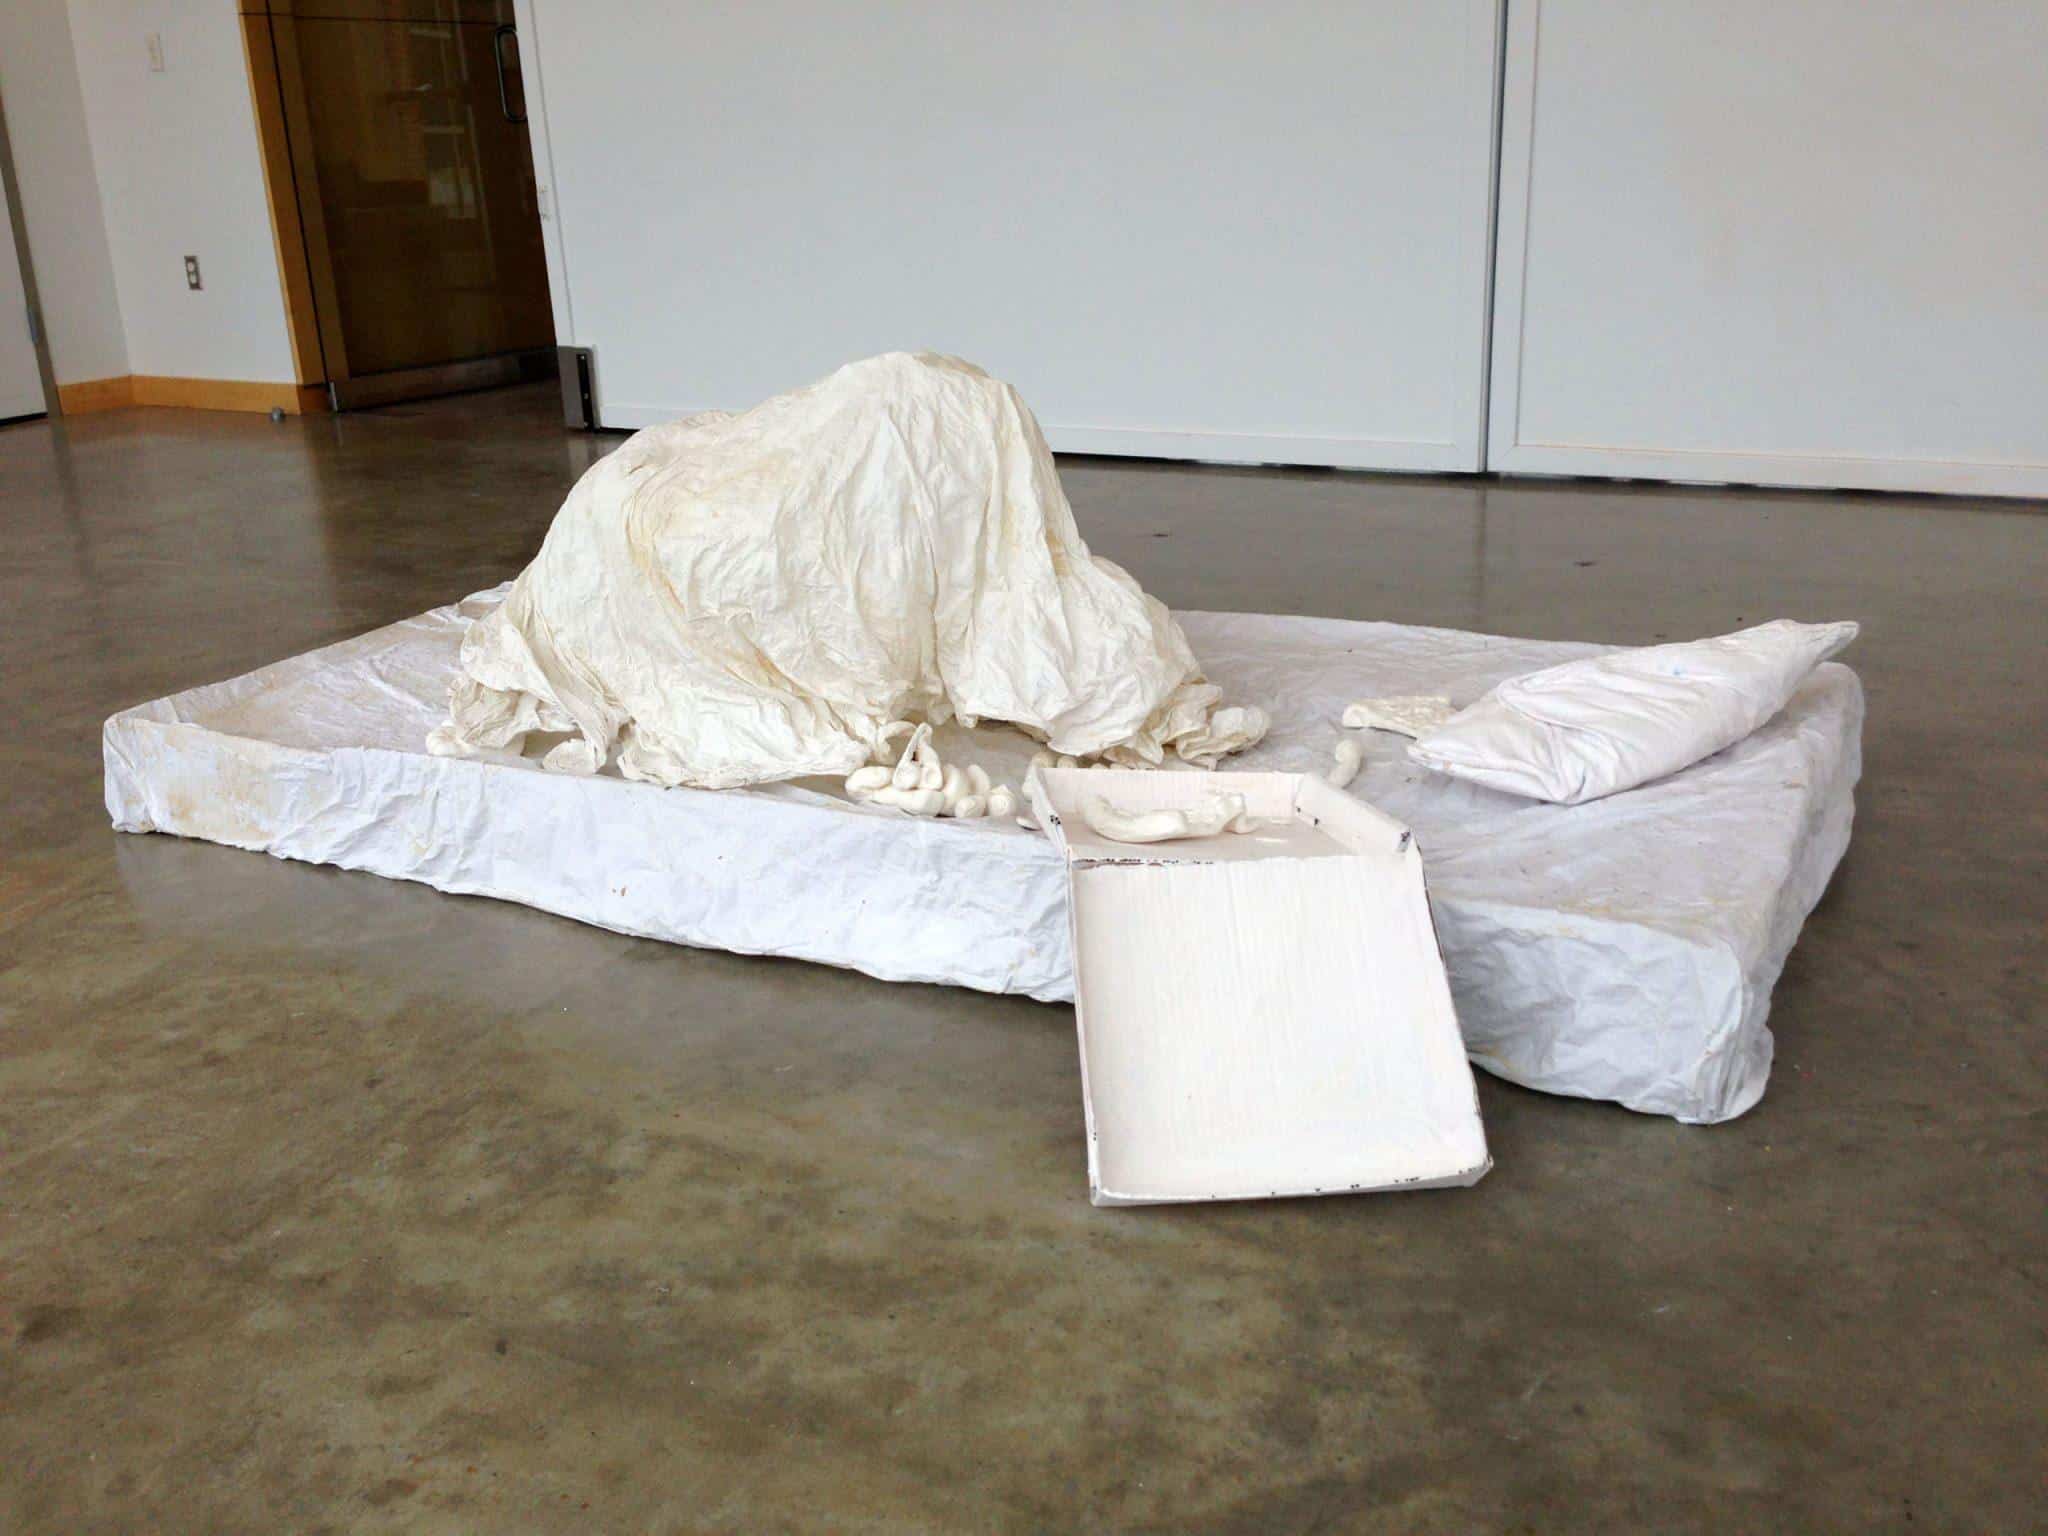 Eben Kling, Chicken and Cheese, 2015. Cardboard, bed sheet, corn starch, crayola model magic, Dimensions variable.